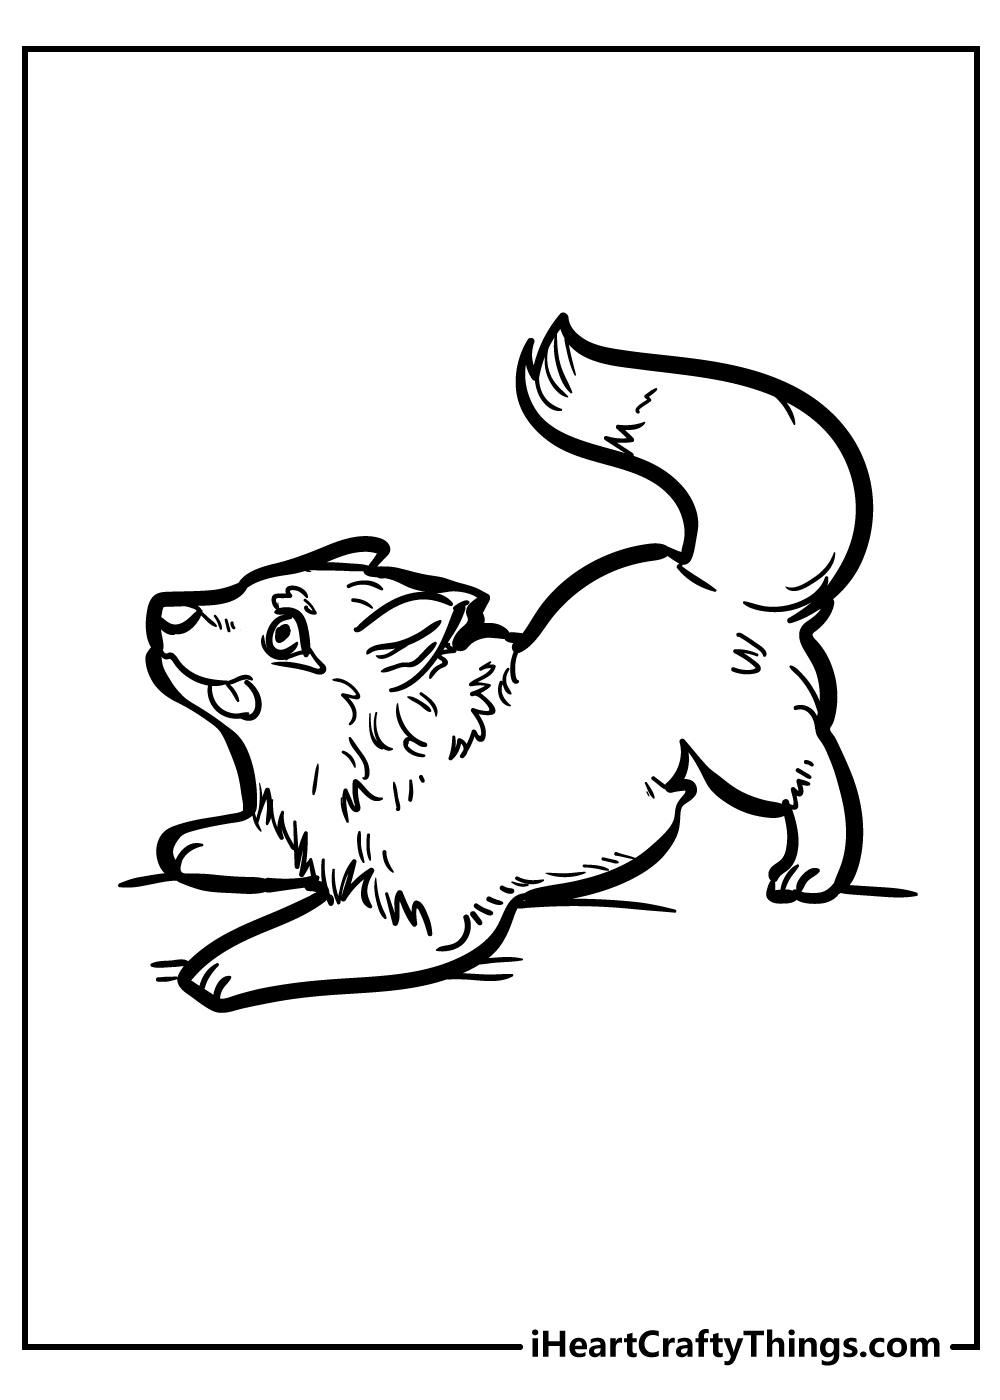 Wolf coloring sheet for children free download